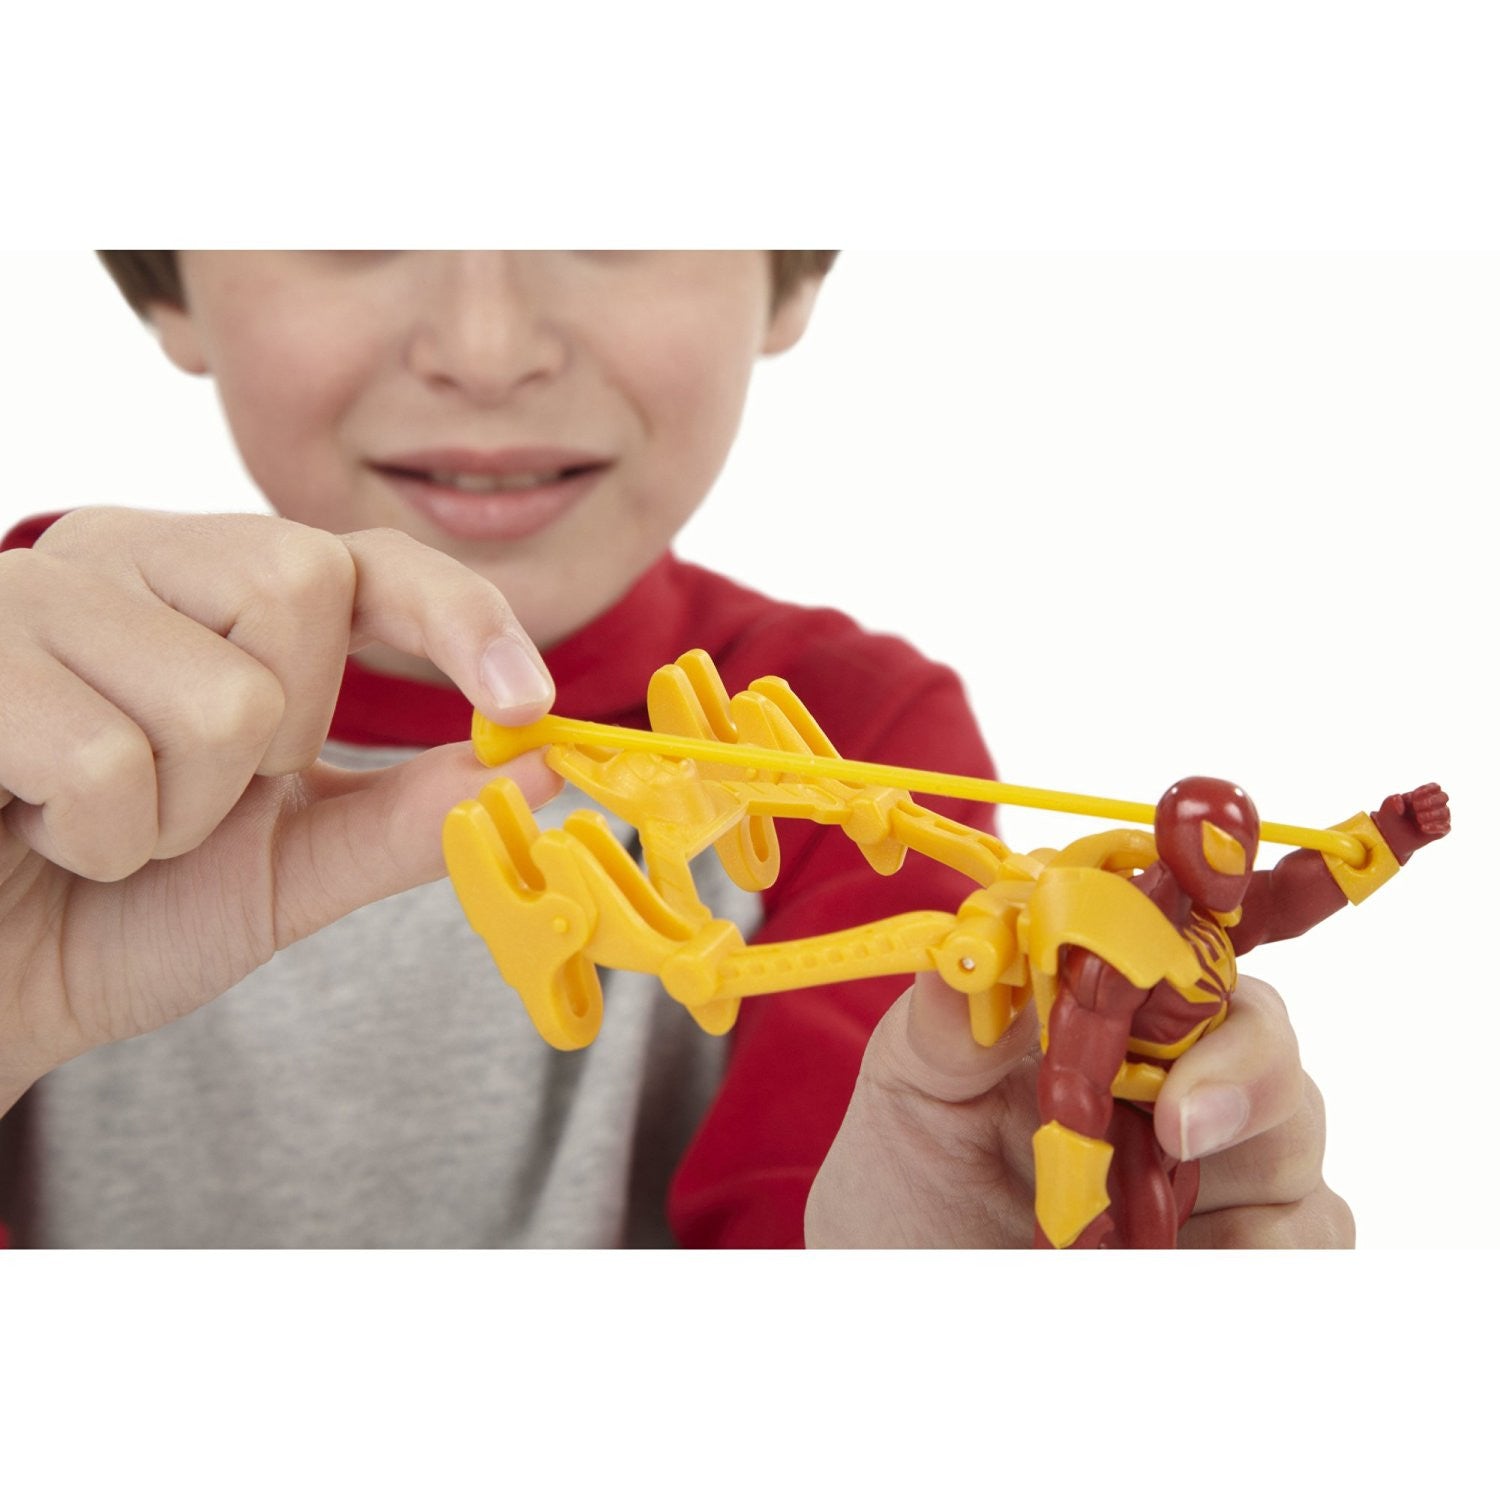 Iron Spider-Man with Web Catapult